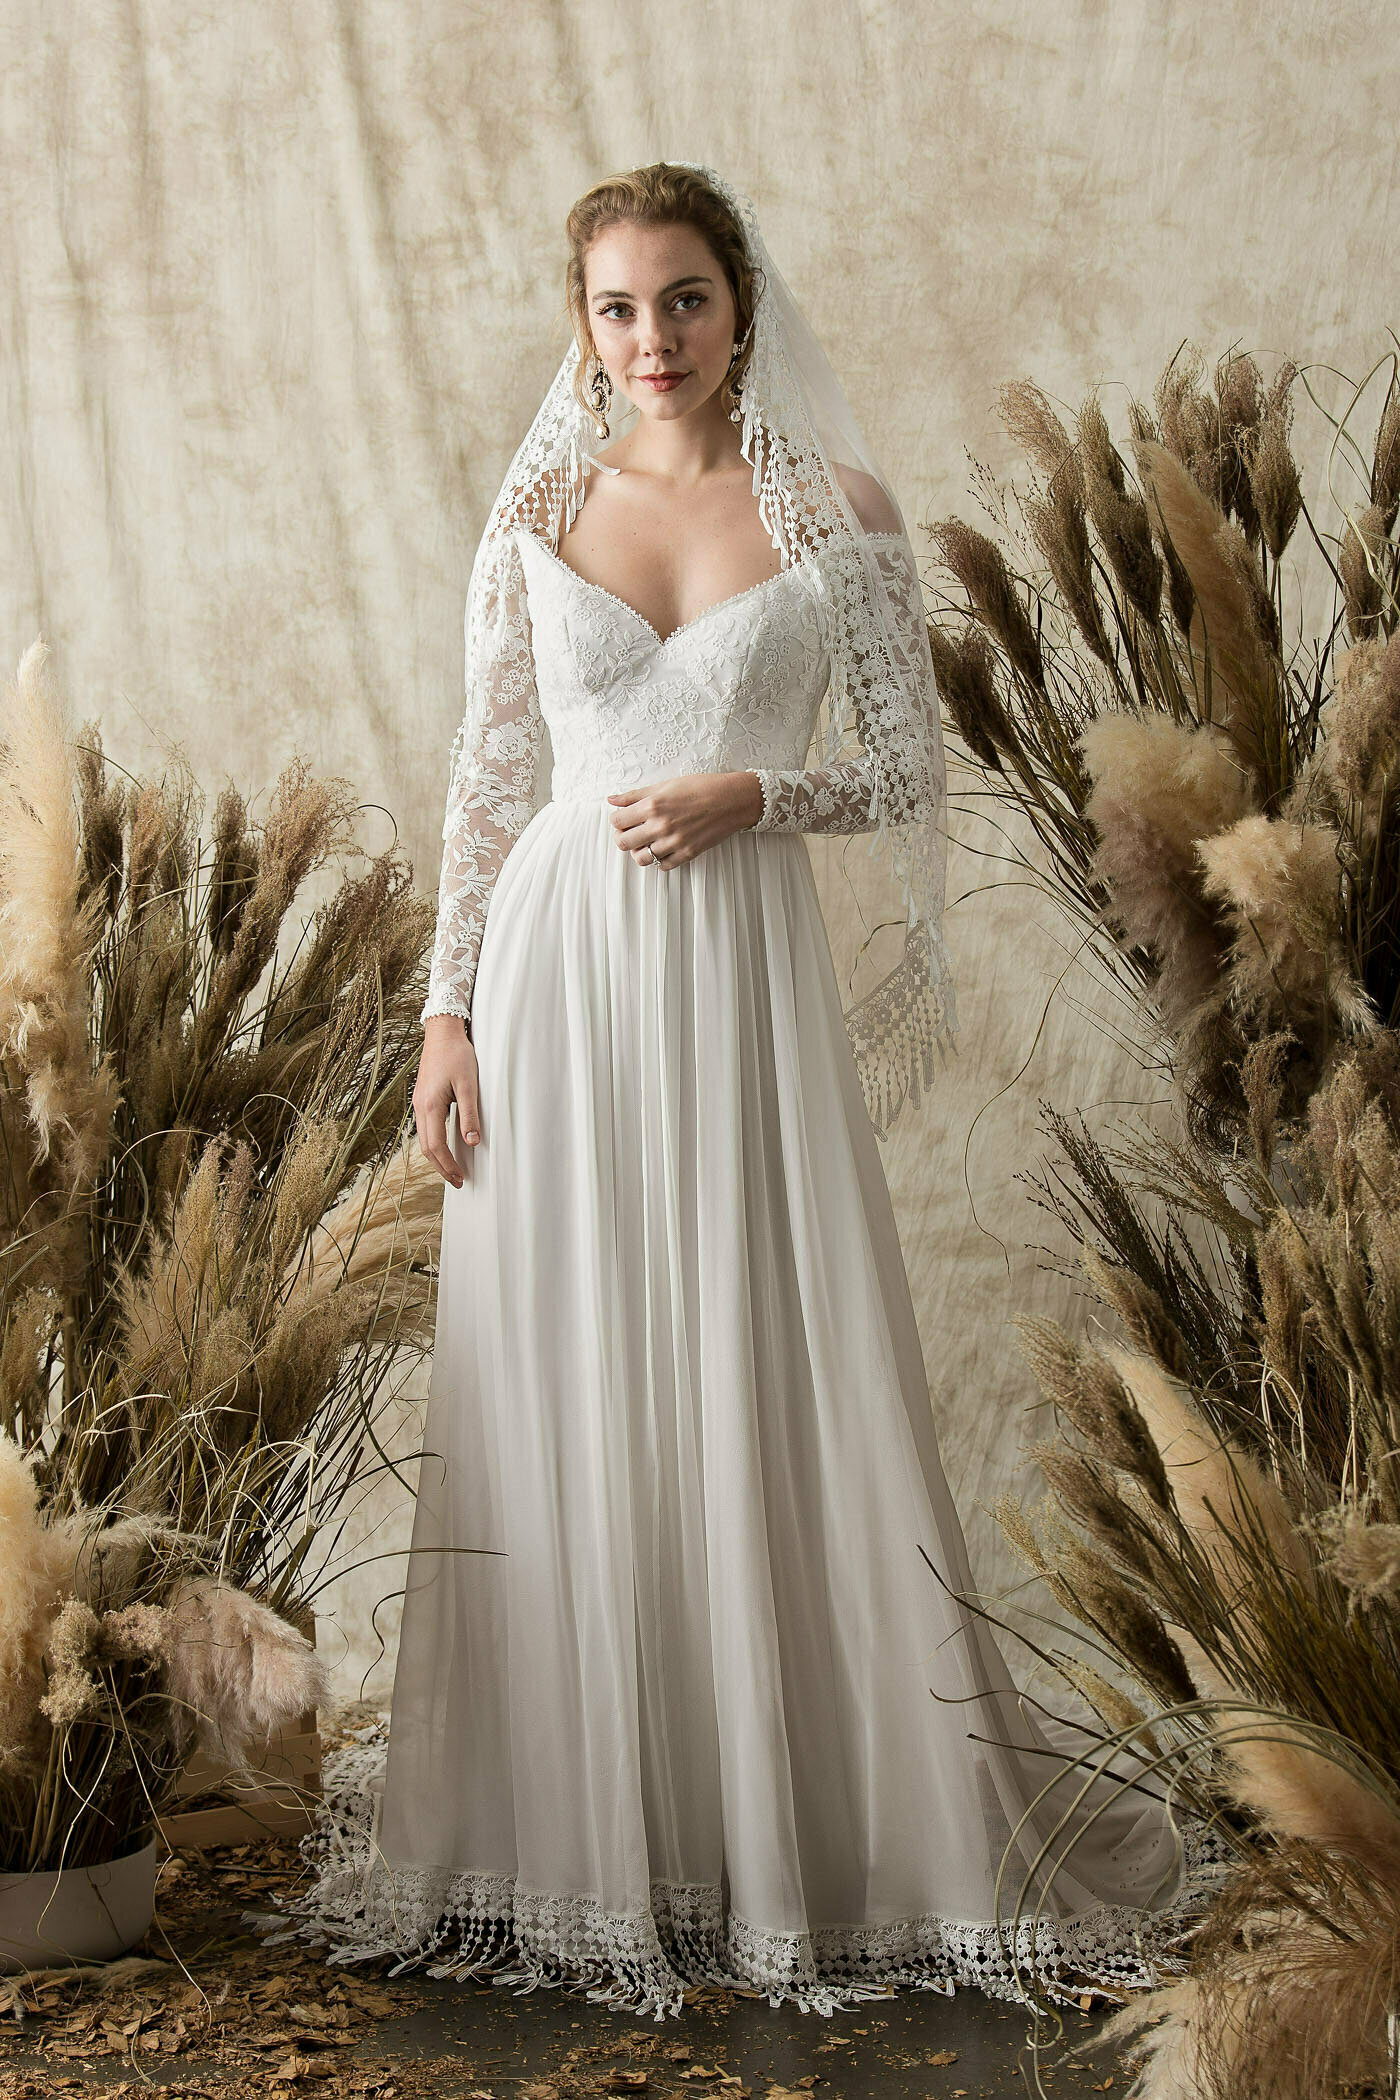 Fingertip-Length Veil With Trimmed Lace